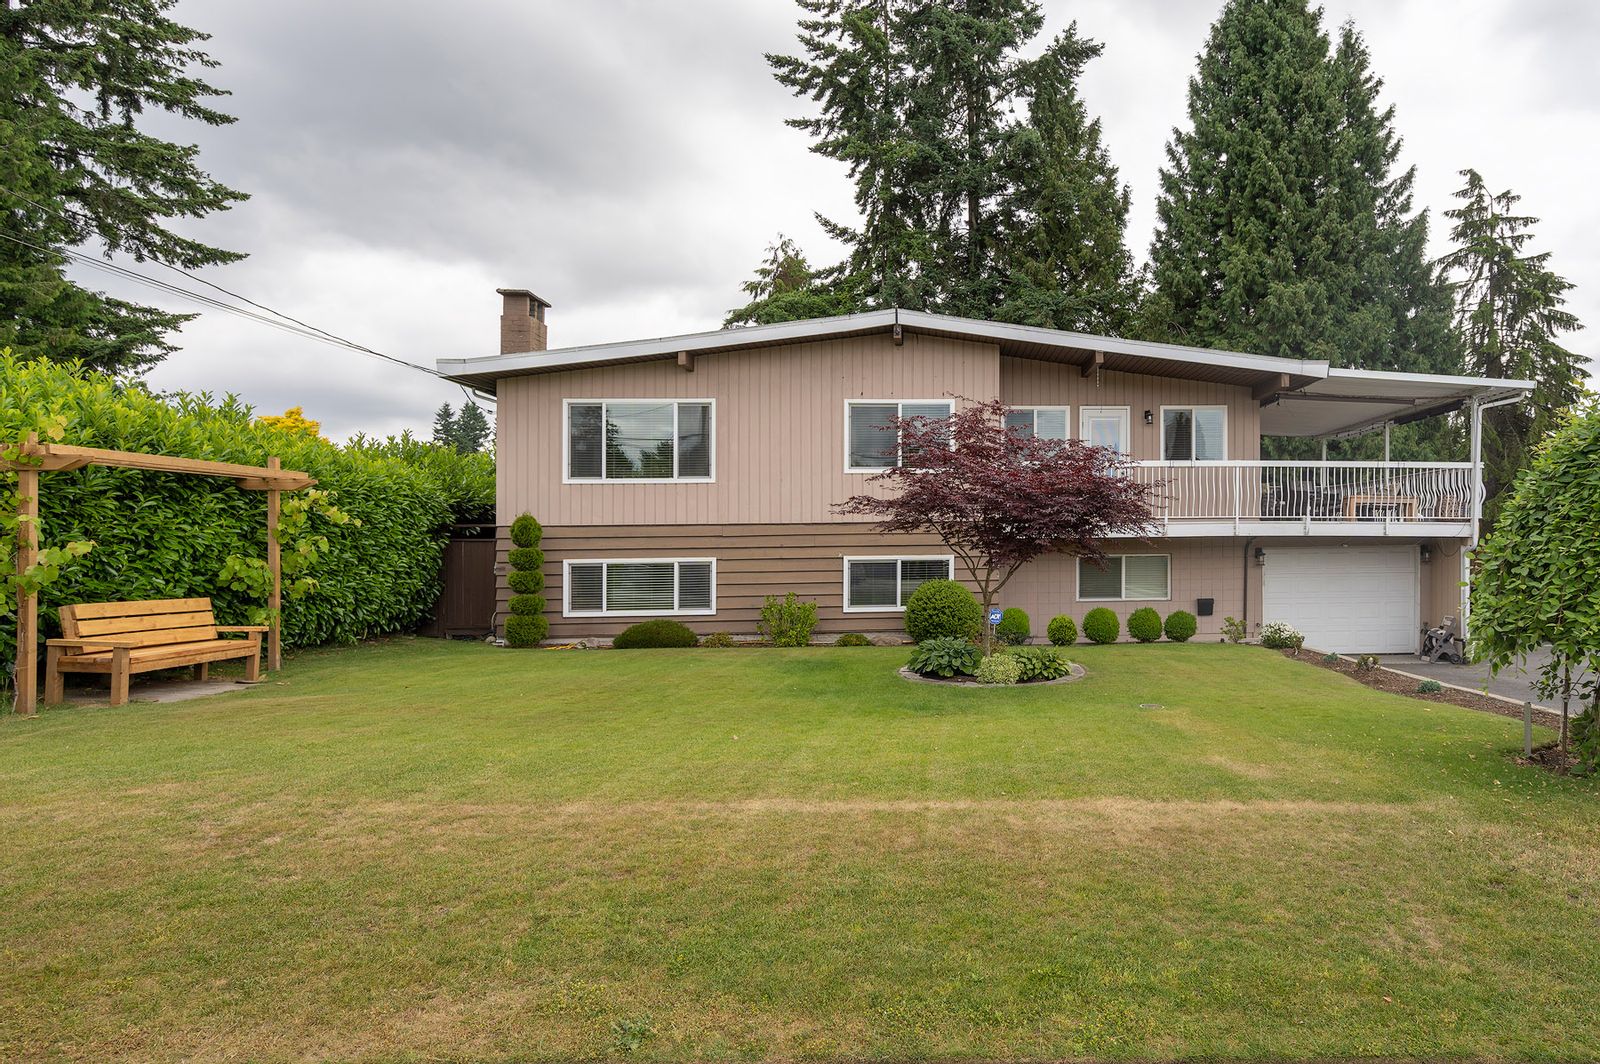 Just Sold: 423 Montgomery St., Coquitlam, Central Coquitlam